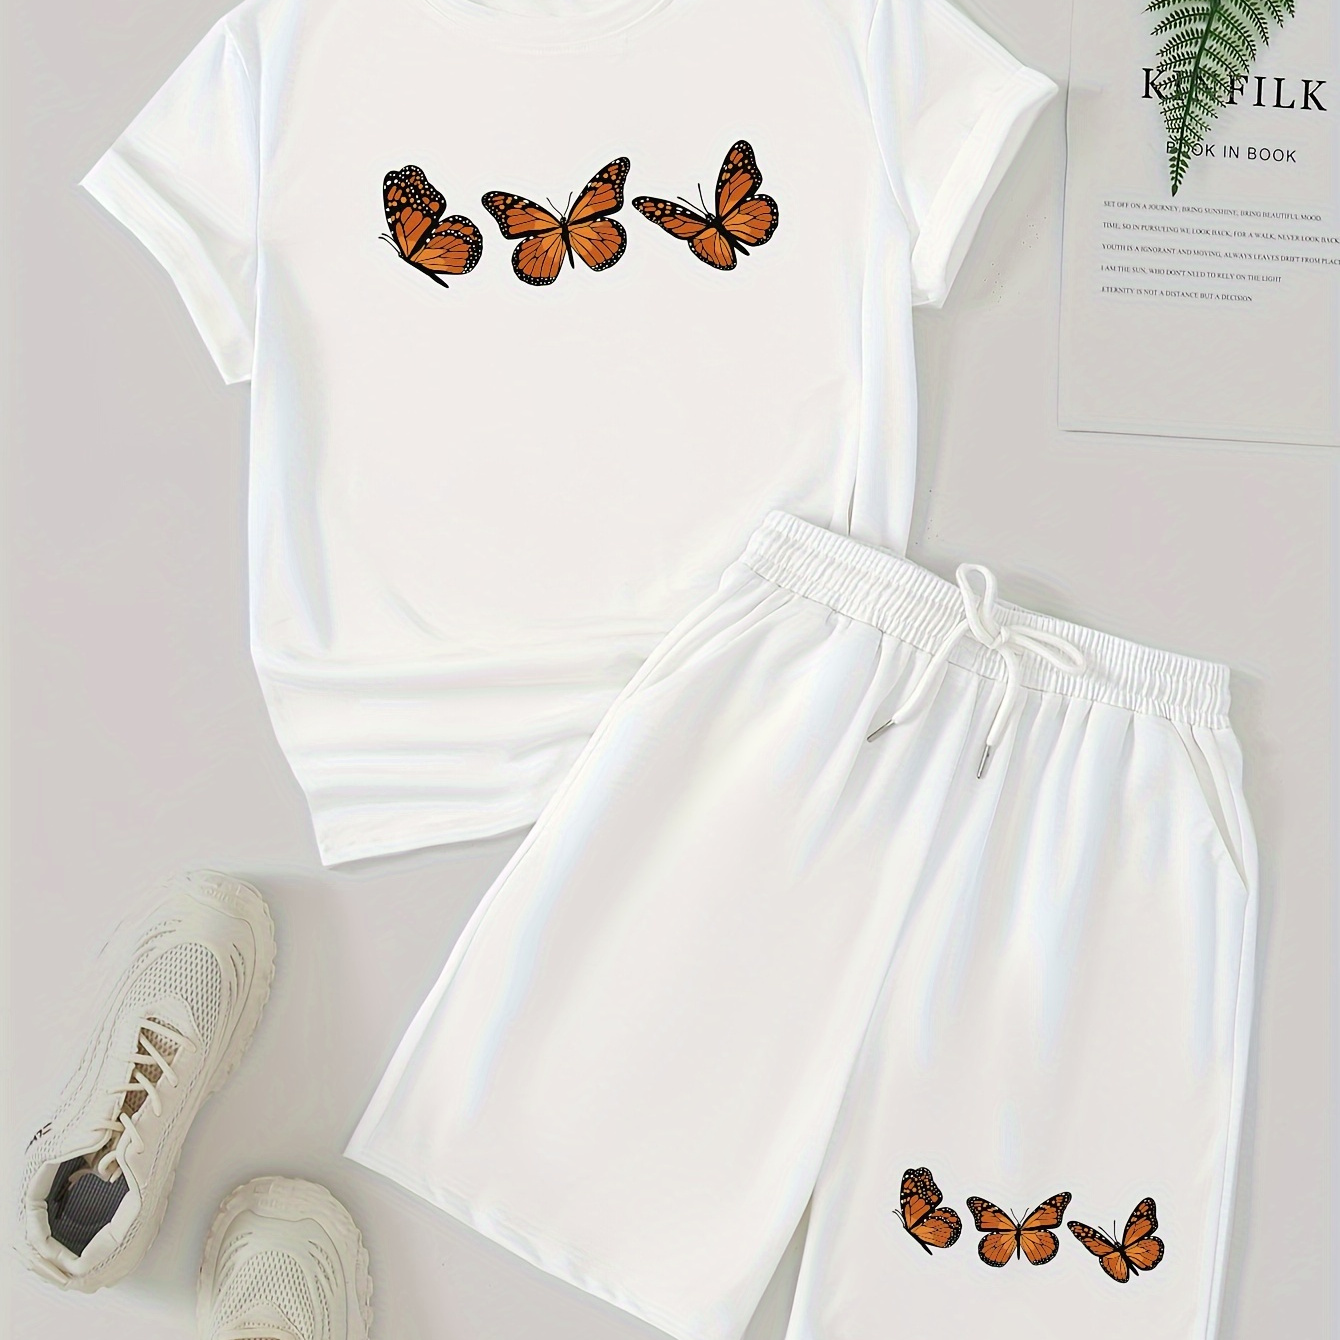 

Women's Summer Casual 2-piece Set, Butterfly Print Short Sleeve T-shirt & Shorts, Trendy Cool Aesthetic Design, Round Neck, Fashionable Sporty Outfit